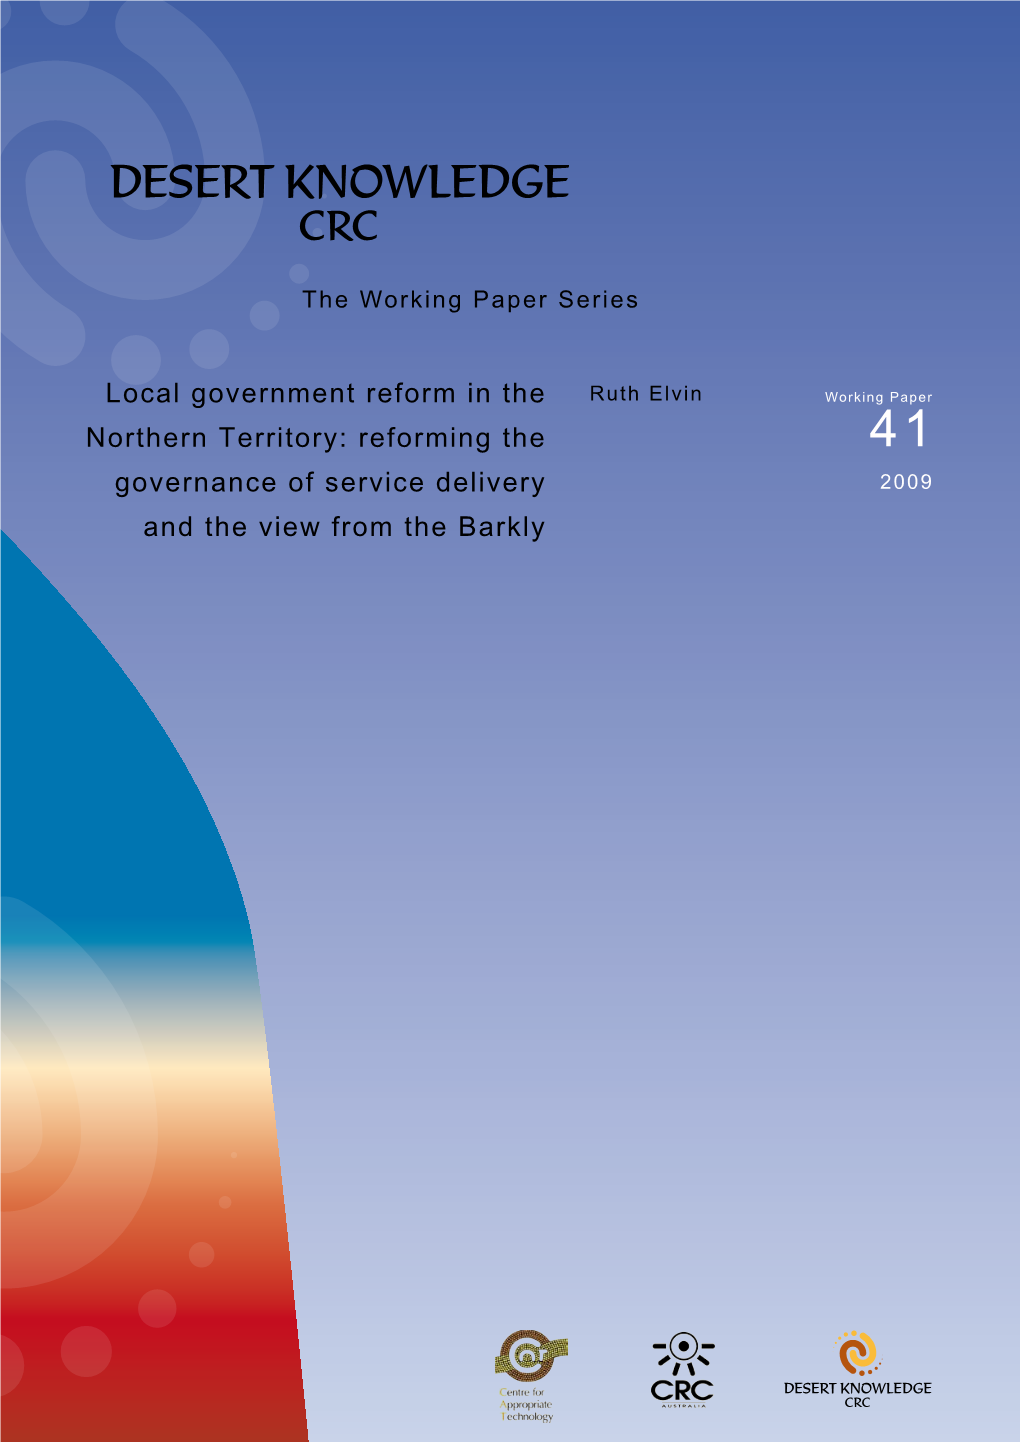 Local Government Reform in the Northern Territory: Reforming the Governance of Service Delivery and the View from the Barkly